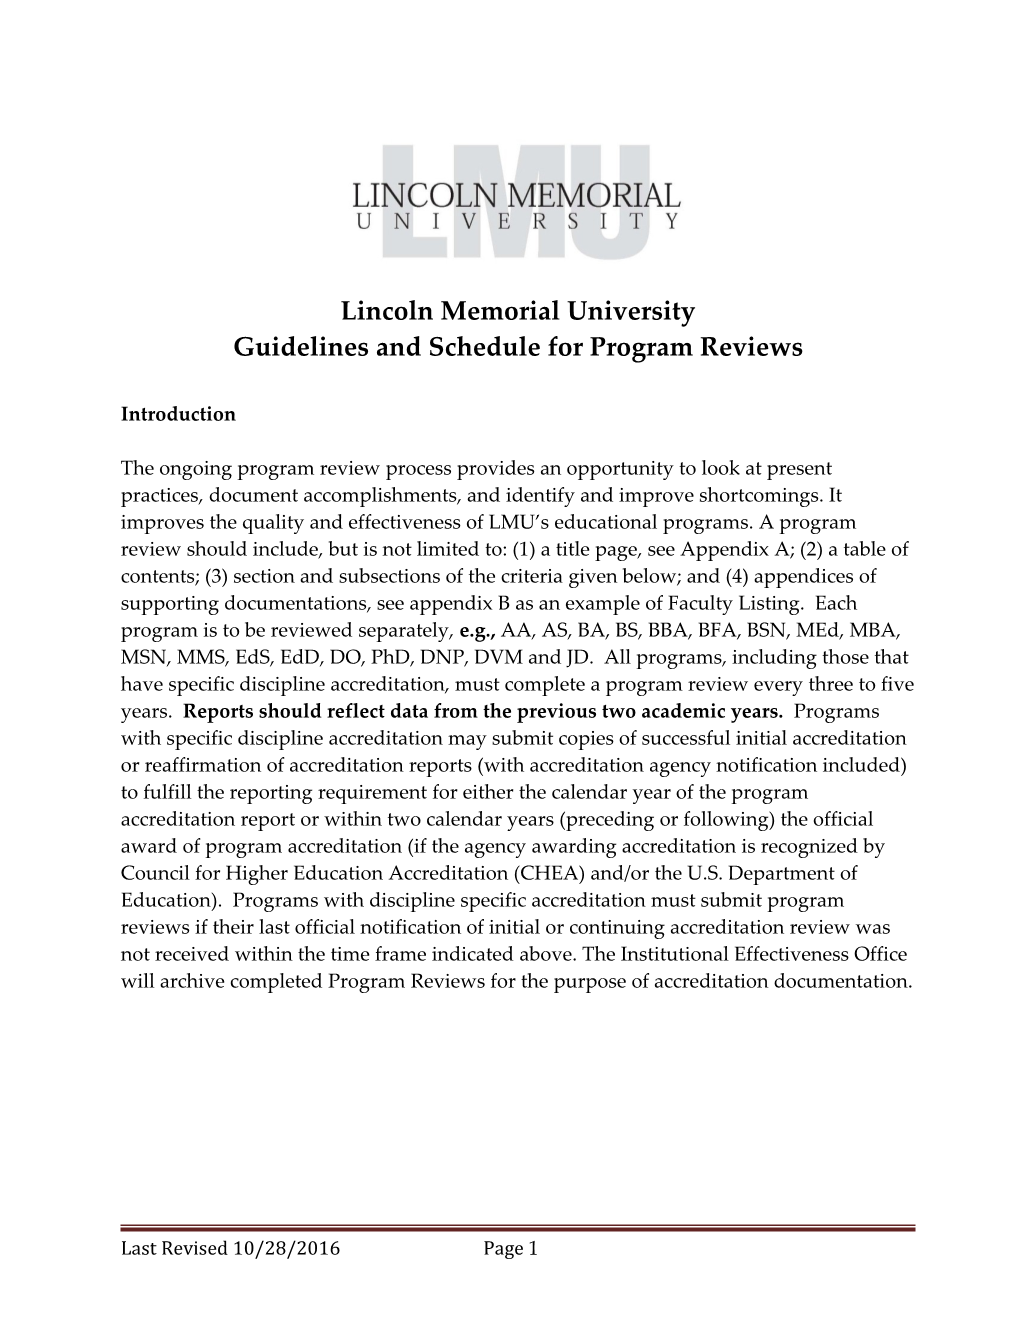 Guidelines and Schedule for Program Reviews